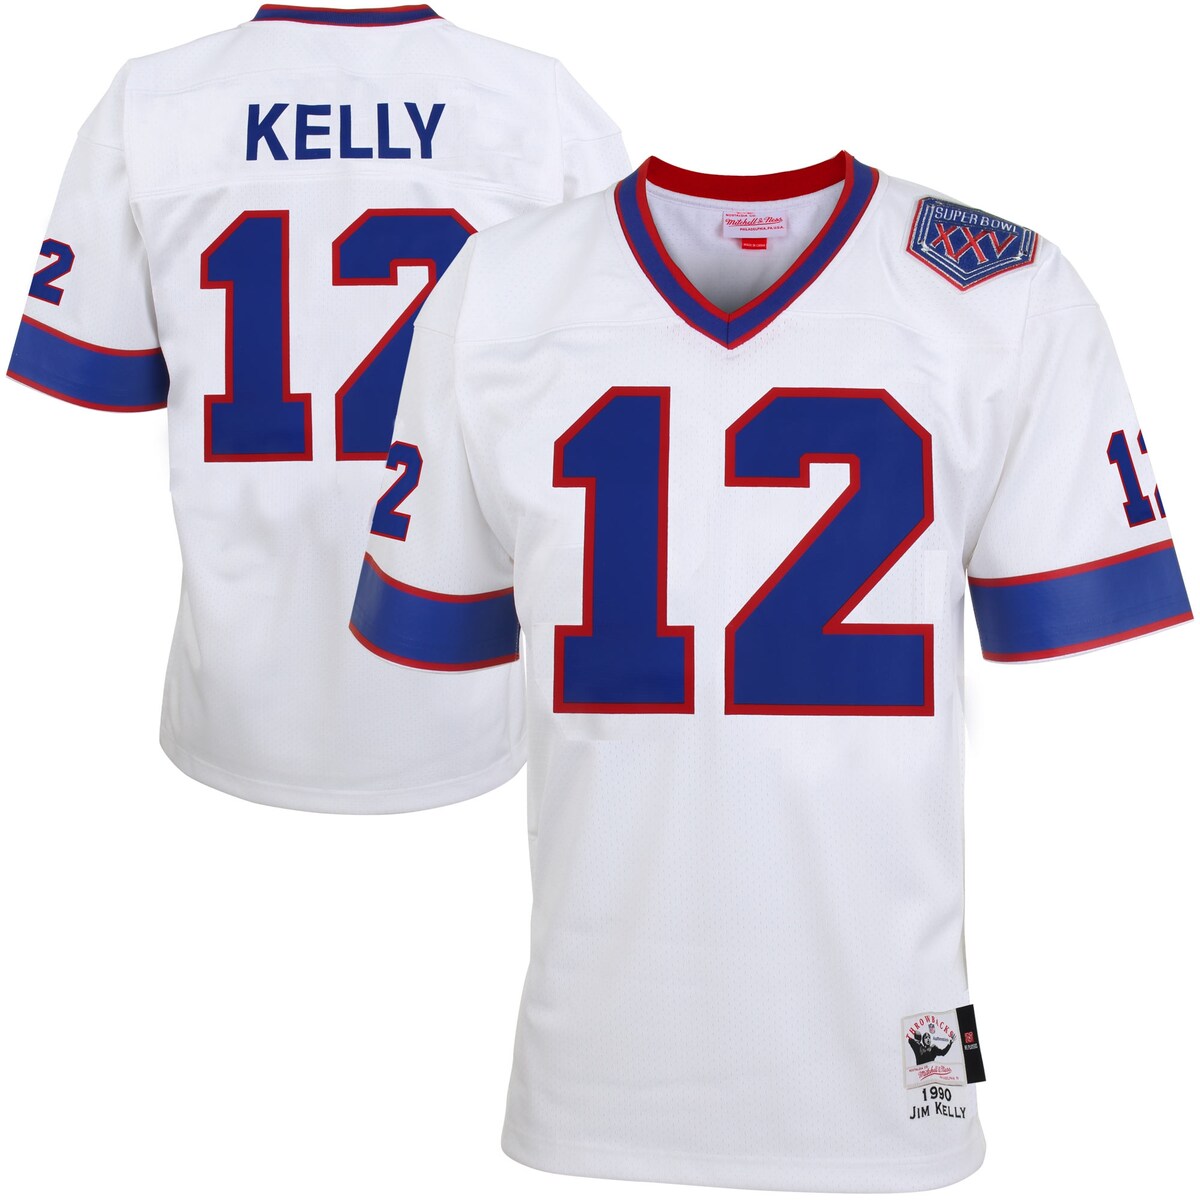 Celebrate your Buffalo Bills with this Authentic Throwback jersey from Mitchell & Ness! You'll show some true team spirit and some love for the legendary when you wear this at your next game day get-together! This authentic, professional quality on-field jersey is constructed of premium nylon mesh fabric and is adorned with graphics for a look any Buffalo Bills fan will envy!Material: 100% PolyesterMachine wash, line dryJersey Color Style: RetiredOfficially licensedThrowback JerseyTackle twill numbers & letteringTight weave mesh bodySide slits at hemSewn-on tag with player name beneath jock tagDrop tailOfficially licensed NFL productScreen print stripes on sleevesImportedRib-knit v-neck collarNFL Throwback authentic jock tagBrand: Mitchell & NessDazzle shoulders, sleeves & side panelsConstructed of the same material fabrication, cut lines and numbering systems of the jerseys worn by the players of that era100% Polyester fabric